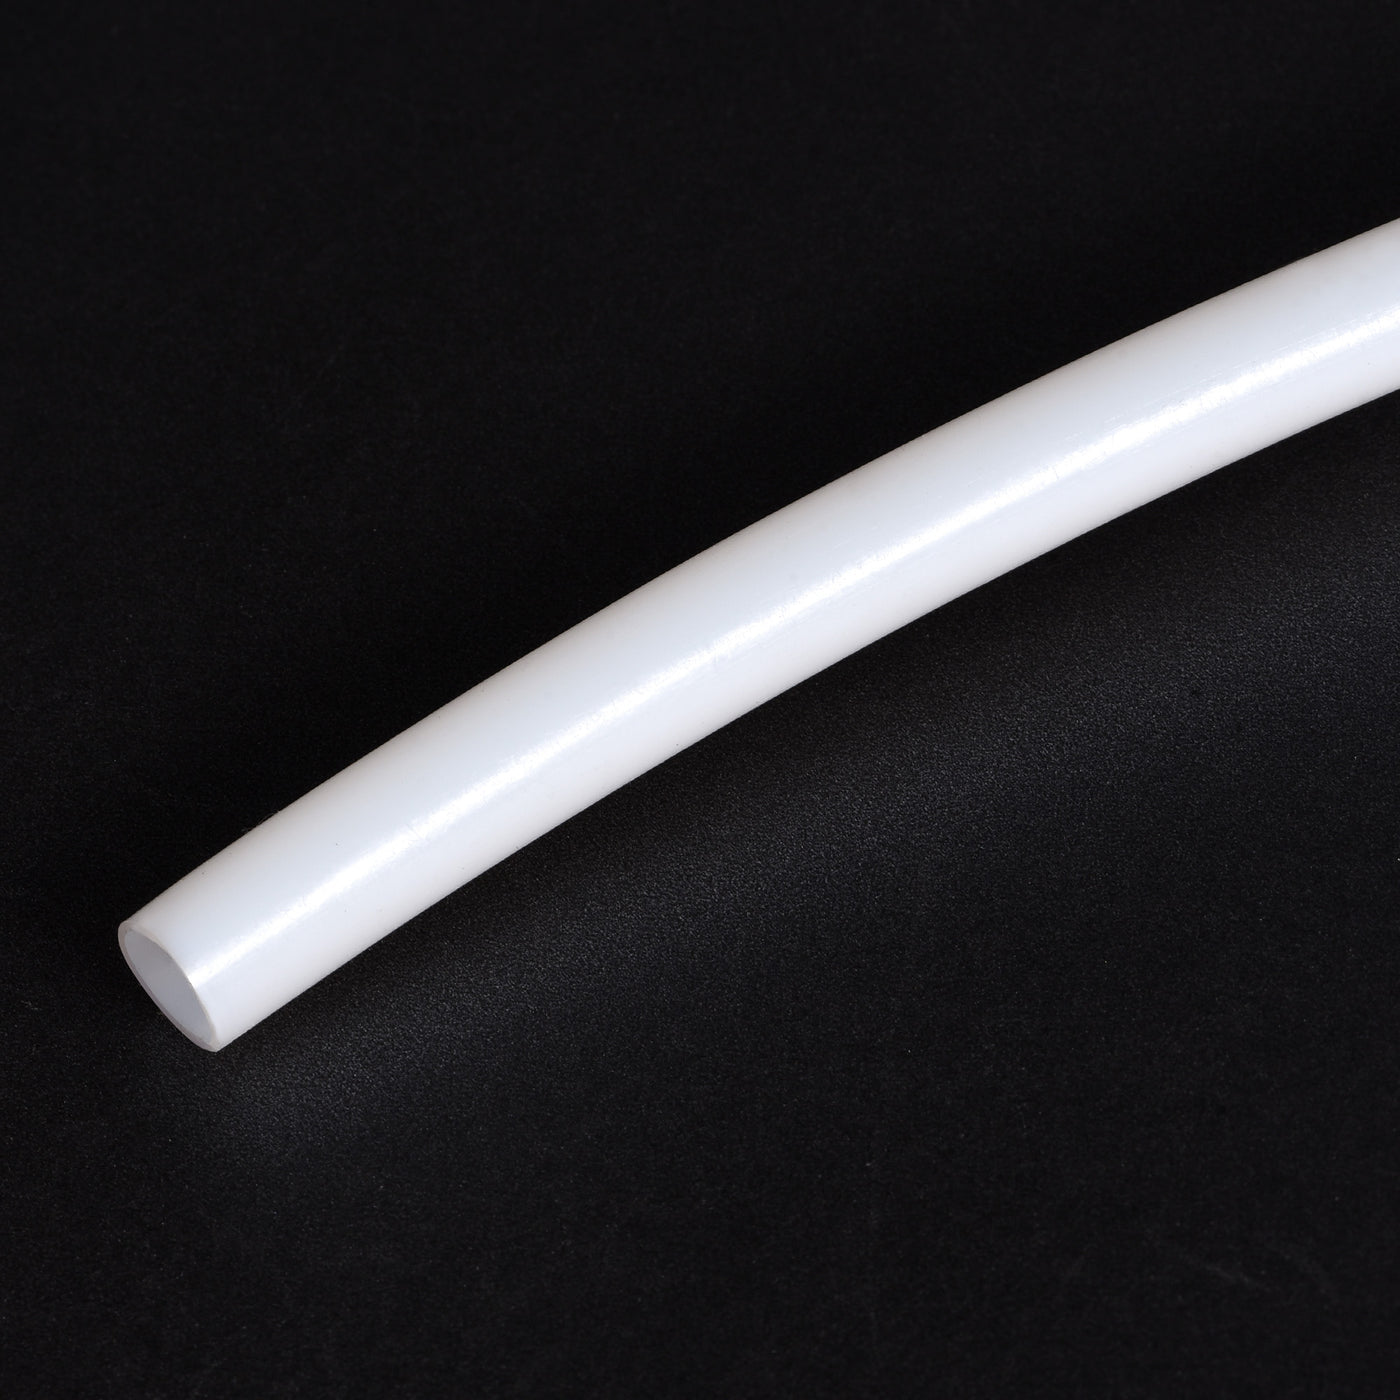 uxcell Uxcell PTFE Tubing Hose Multifunctional Insulating High Temperature Tube Pipe 5mm/0.19''ID x 6mm/0.23''OD x 4.92ft White